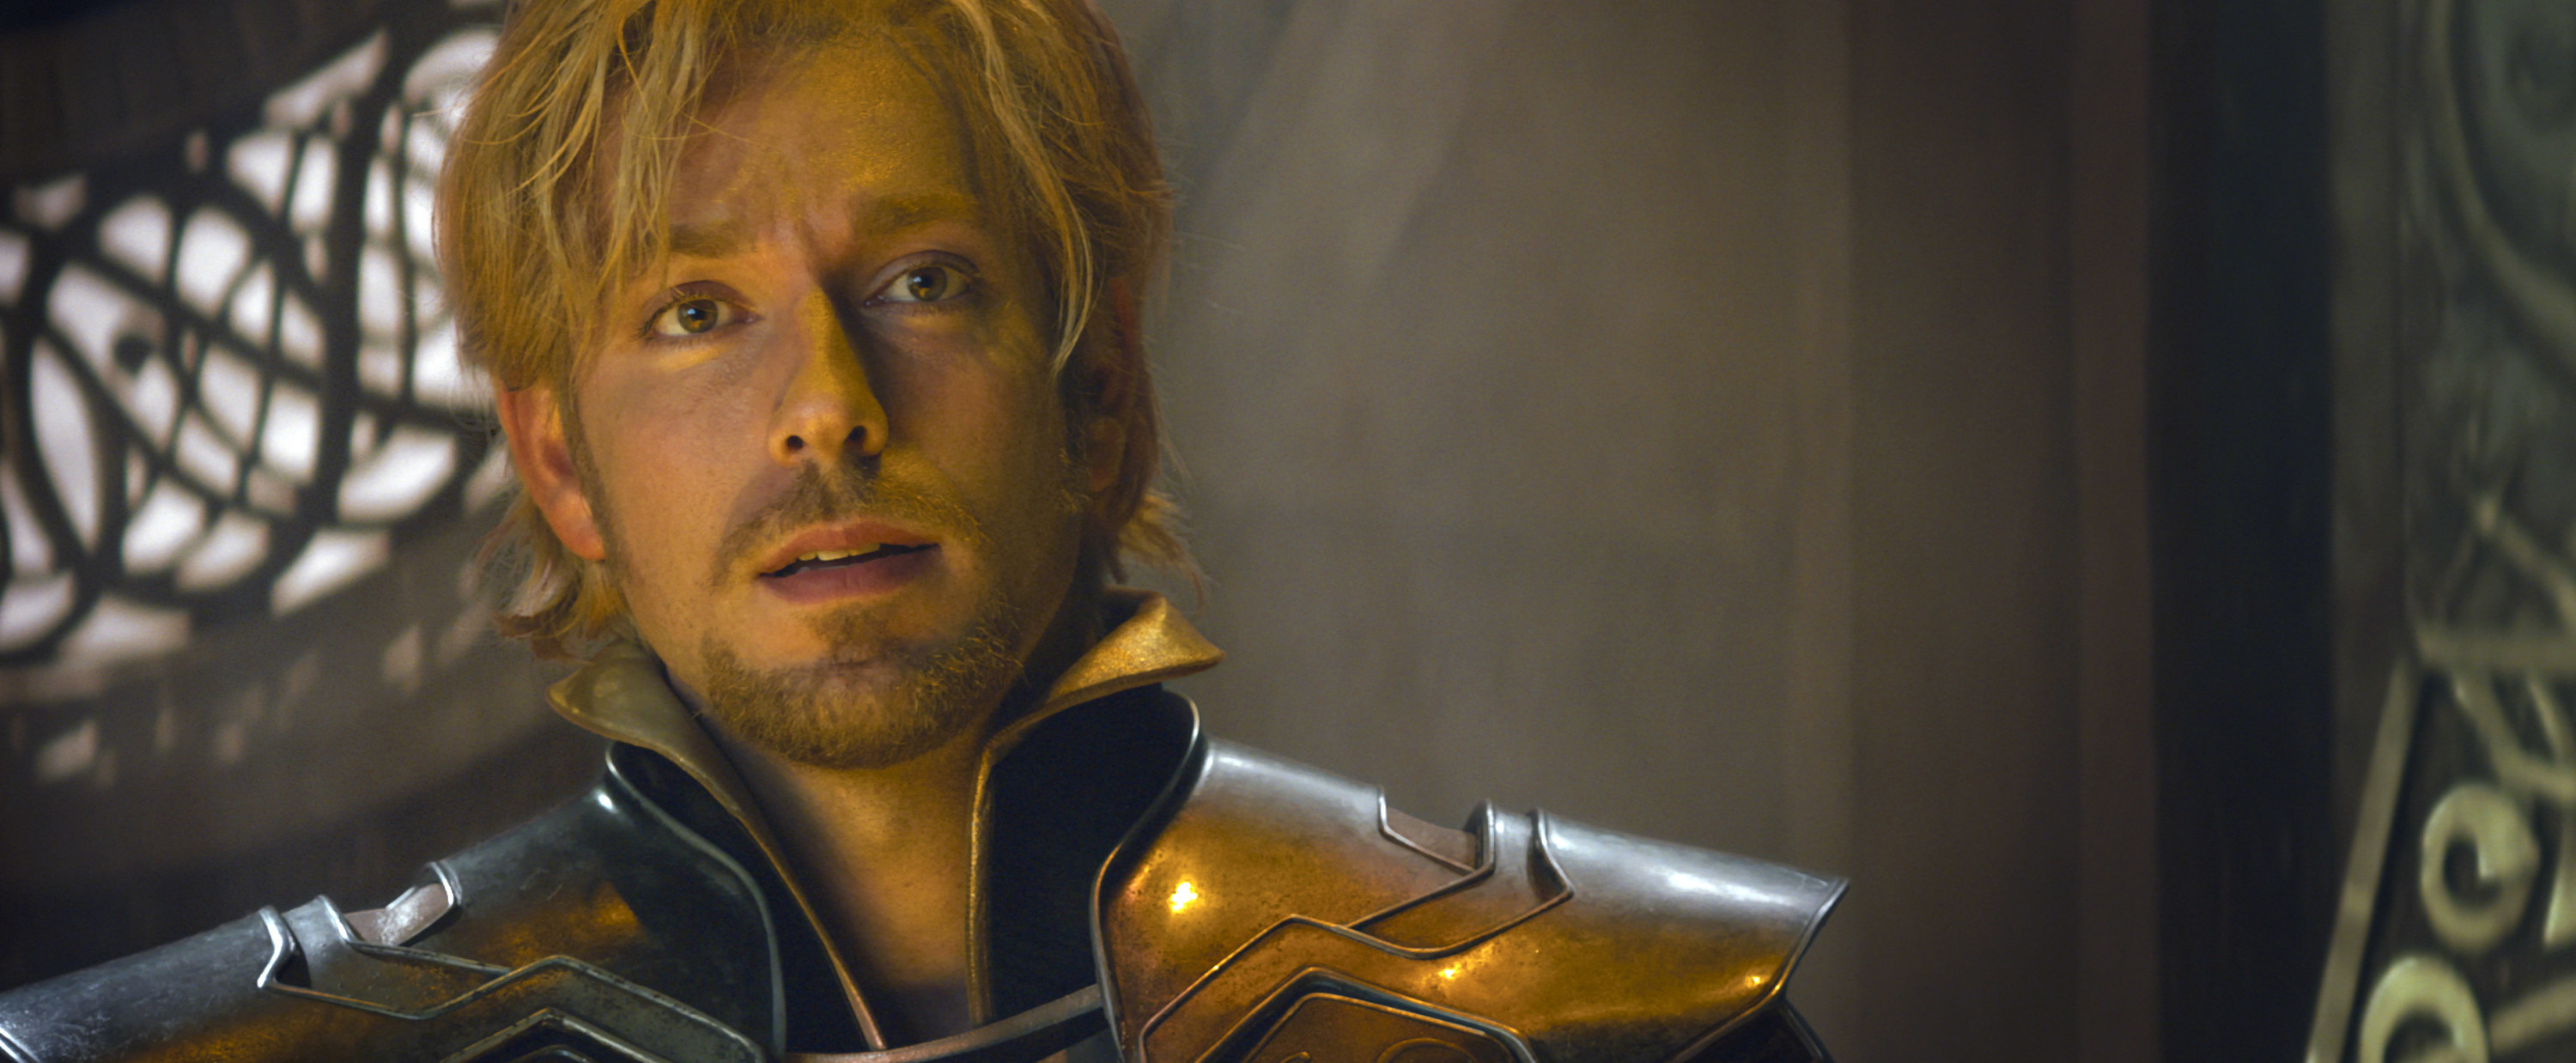 dressed in shiny armor, Fandral gives a pitiful look